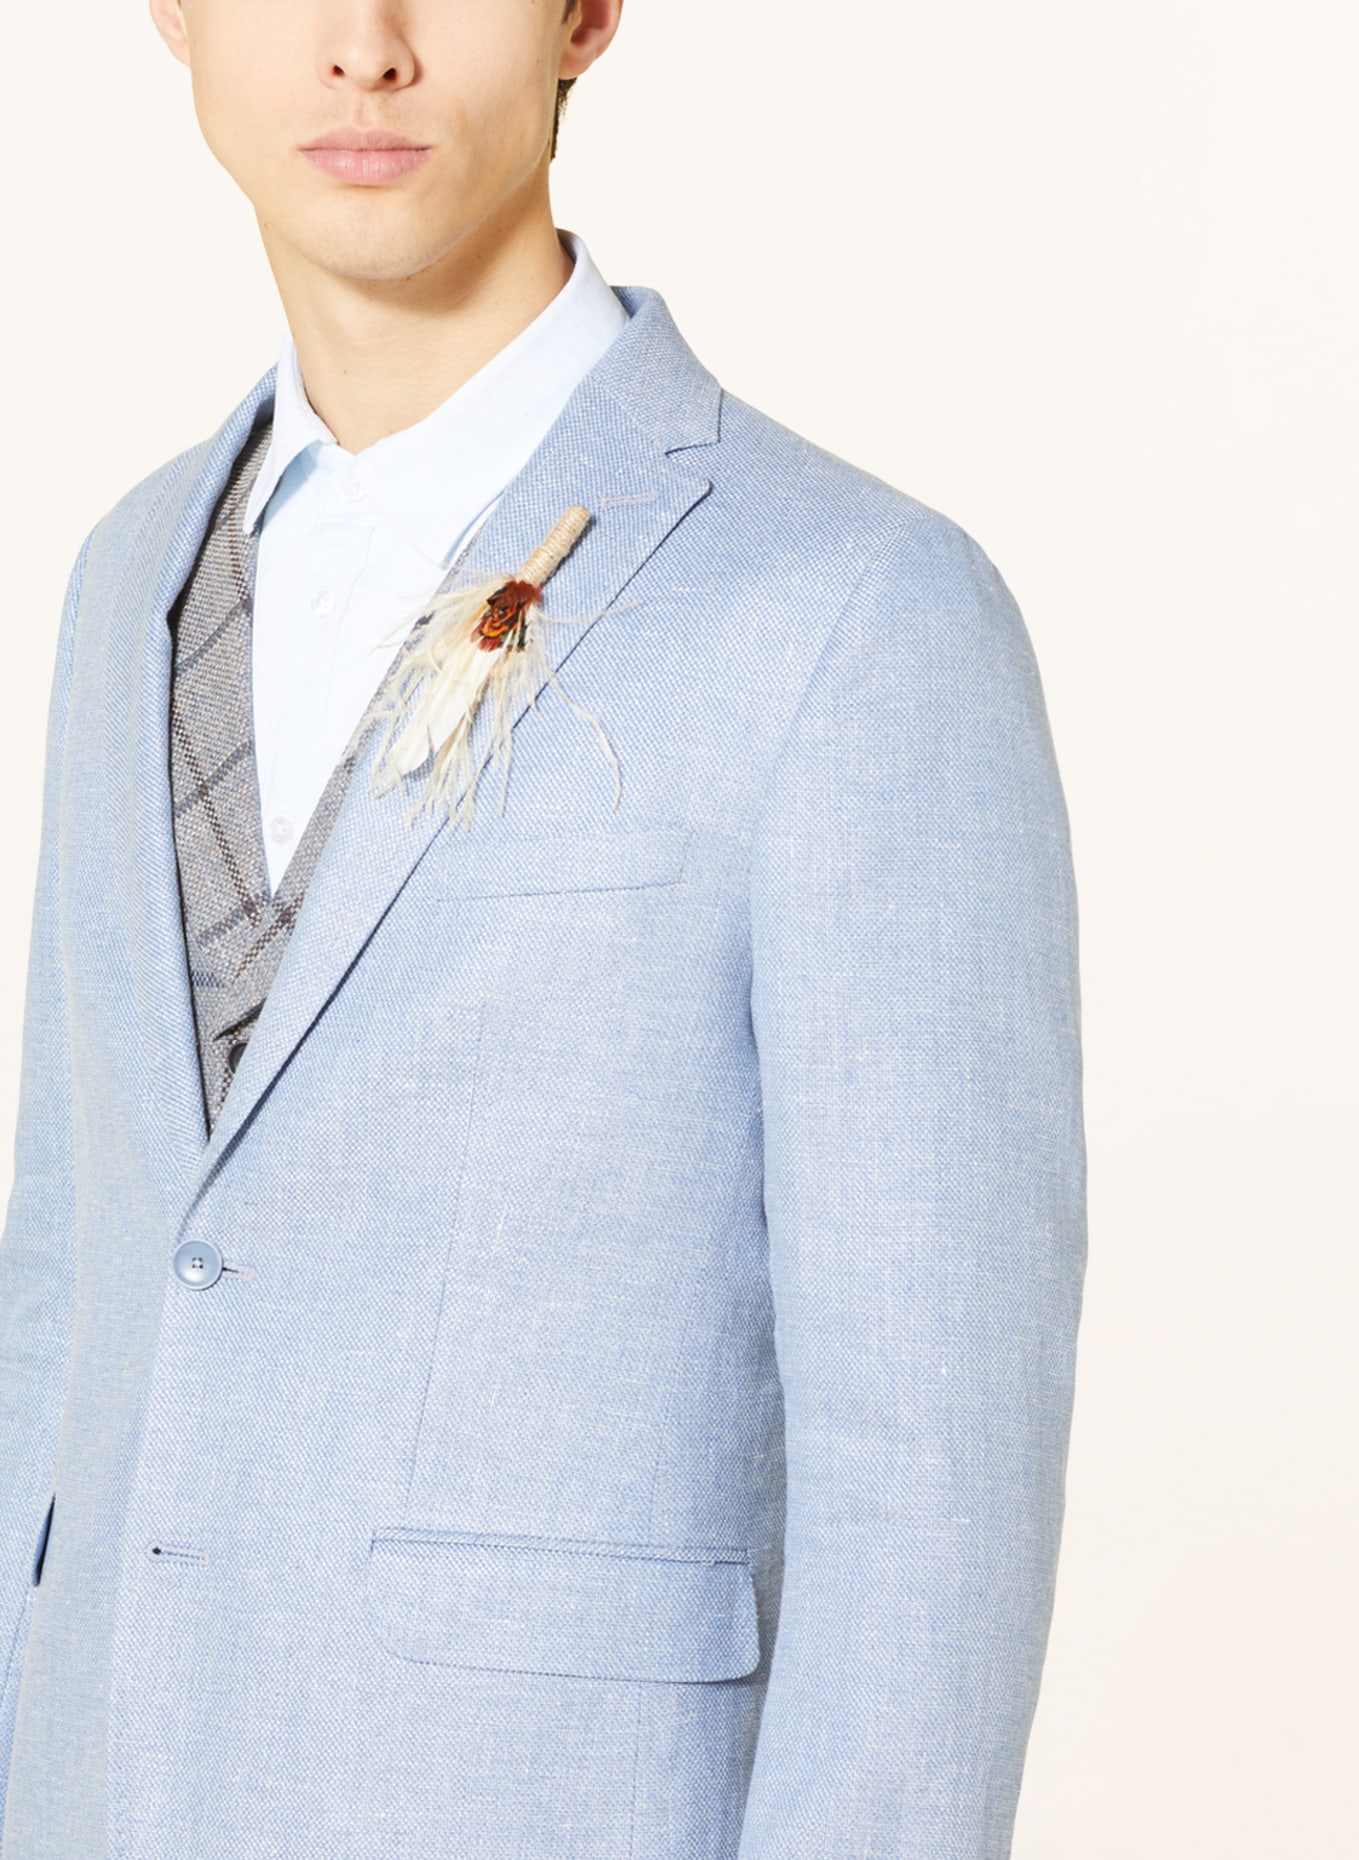 CG - CLUB of GENTS Suit jacket CG PAUL slim fit with linen, Color: 61 BLAU HELL (Image 6)